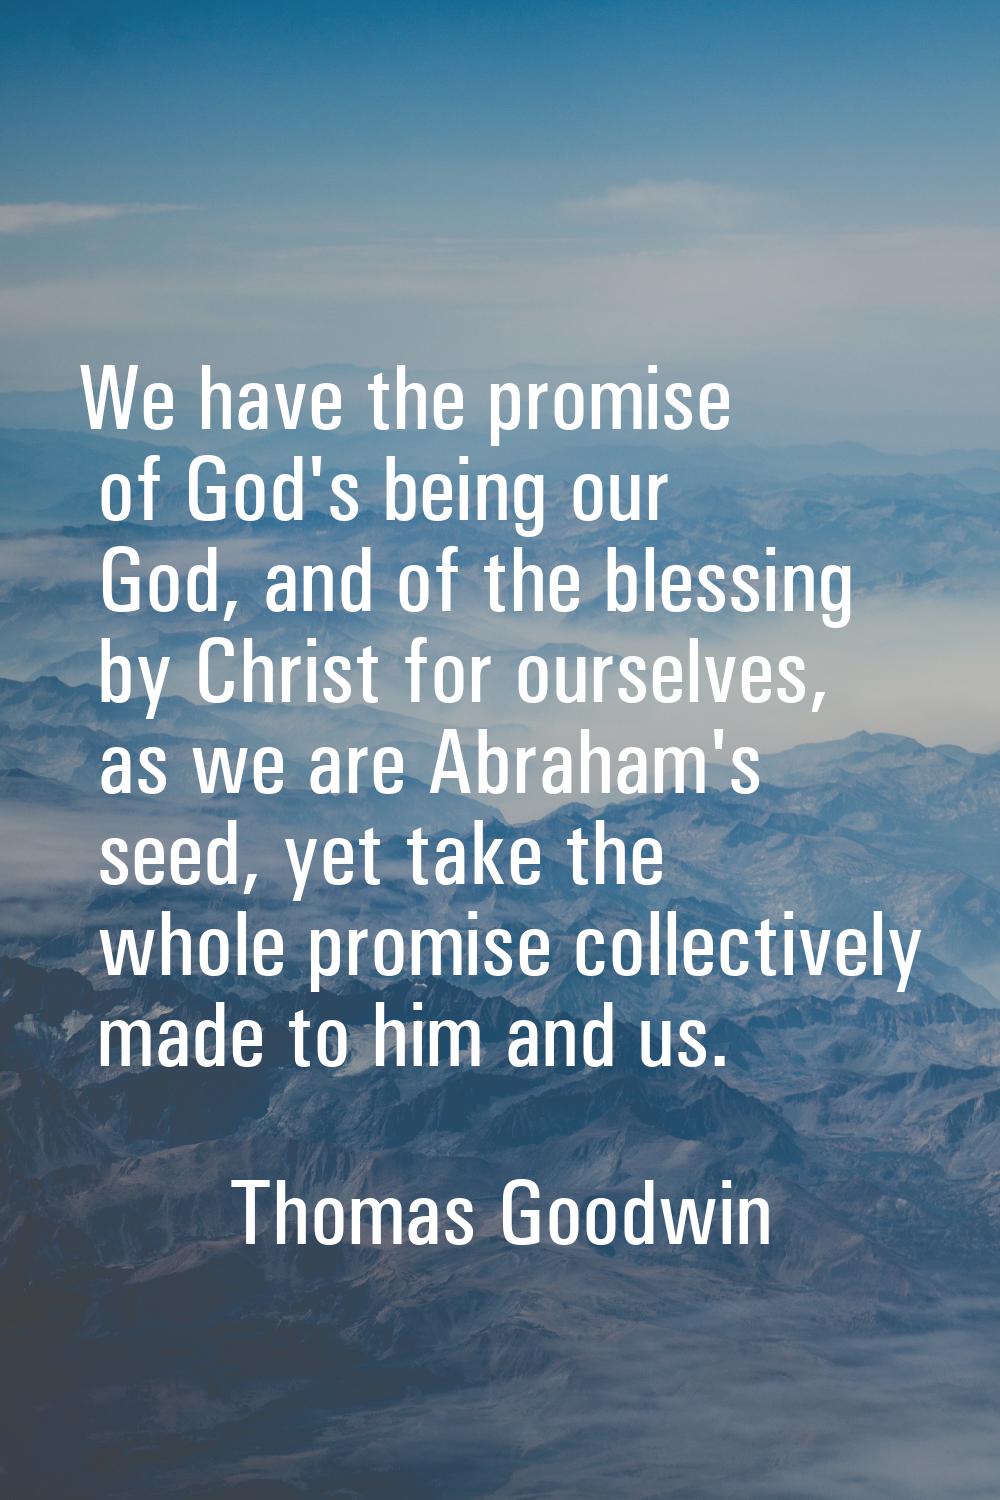 We have the promise of God's being our God, and of the blessing by Christ for ourselves, as we are 